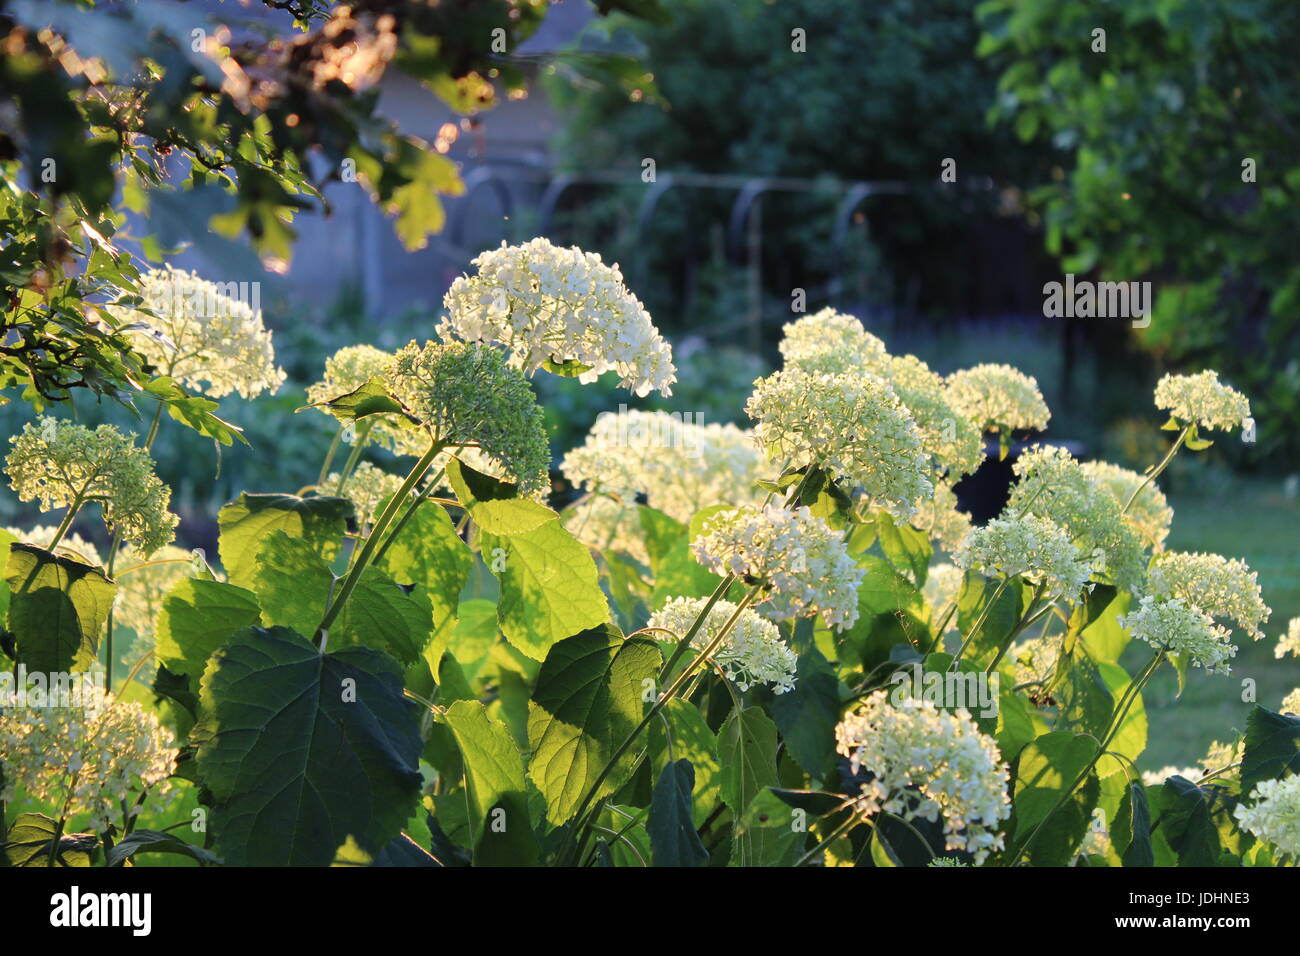 Romantic Hydrangea arborescens Annabelle, backlit by the low evening sun in summer. Stock Photo